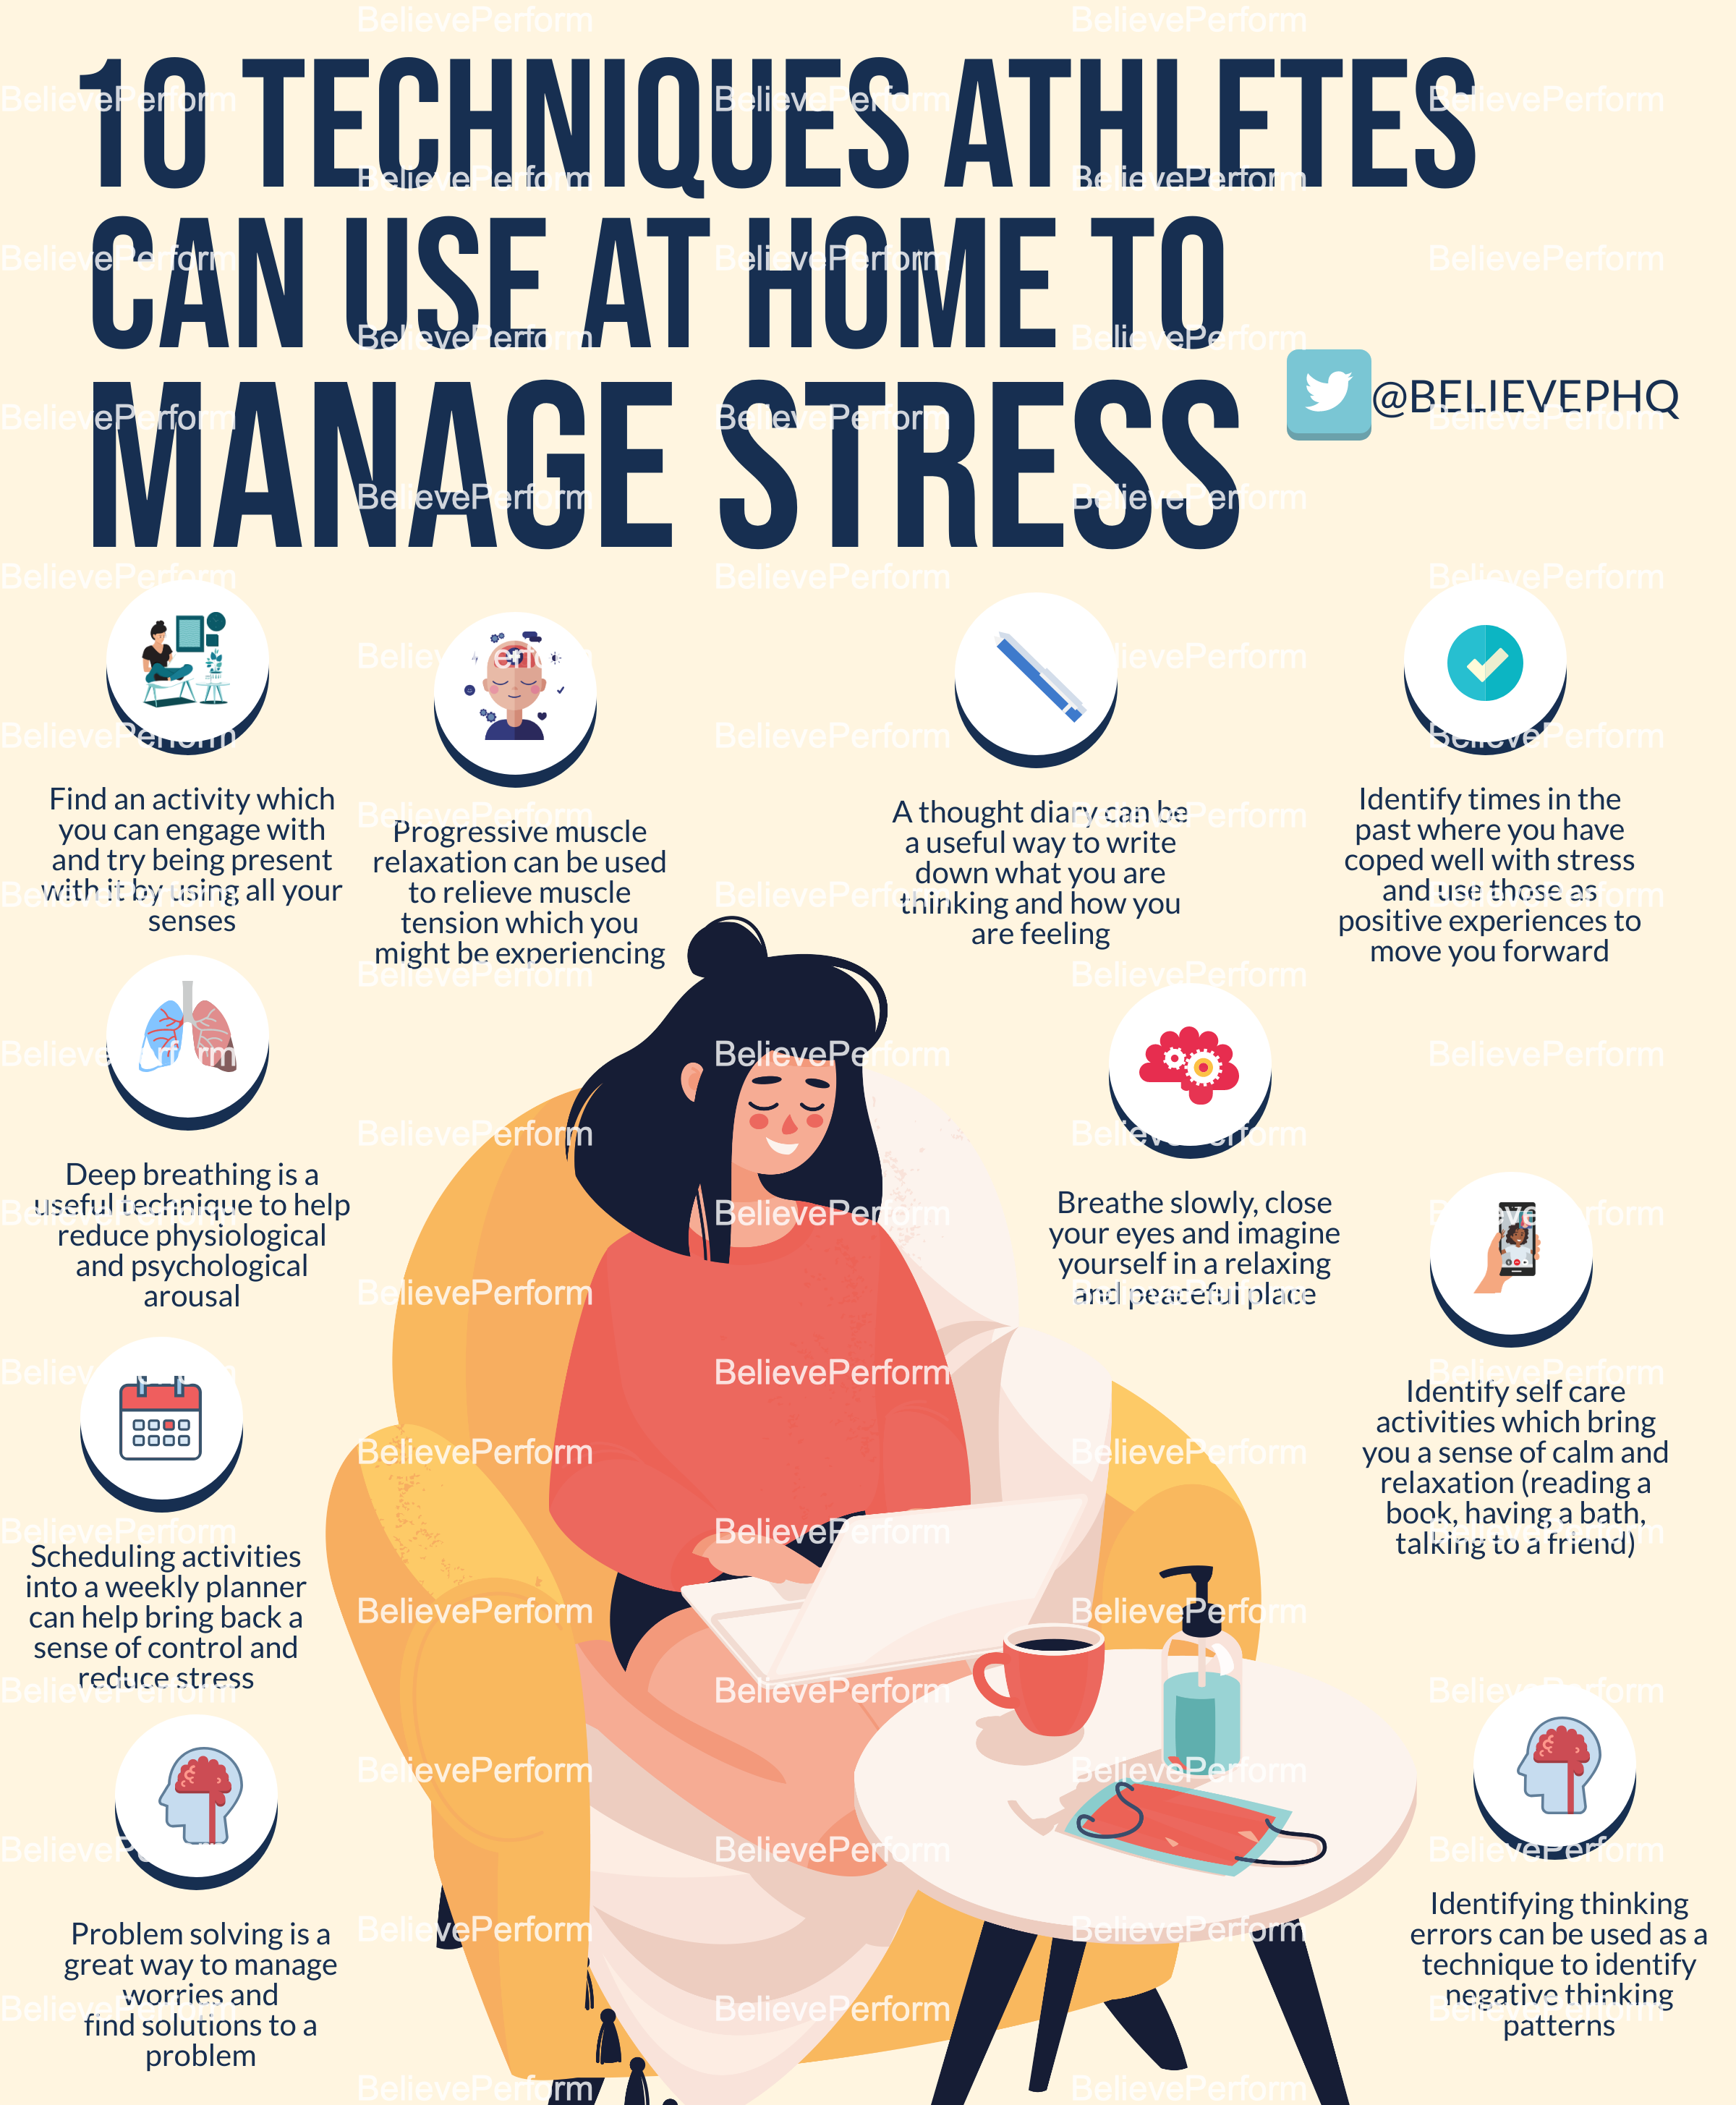 stress can be managed by to manage stress stress 10 stress management in sports 10 stress sports and stress management stress management about sports that manage stress managing stress as a manager stress management techniques stress management stress techniques stress and stress management stress management techniques are can stress stress management is about stress management can be about stress management stress in sports stress at home stress and management stress management is 10 stress management techniques stress management techniques in sport stress can be solve stress management by stress useful stress stress management in management stress in athletes stress management for managers stress management techniques for athletes stress management for athletes use stress stress management and techniques maintain stress stress management at home stress in home the stress management techniques stress management products techniques in stress management stress can be managed stress and stress management techniques stress & stress management manageable stress stress stress management athletes and stress stress management techniques at home a stress management techniques the stress management techniques used to manage stress stress management technique is be a stress manager stress and management of stress stress management stress stress and the manager stress management techniques in management stress as a manager stress for athletes it manager stress stress management for